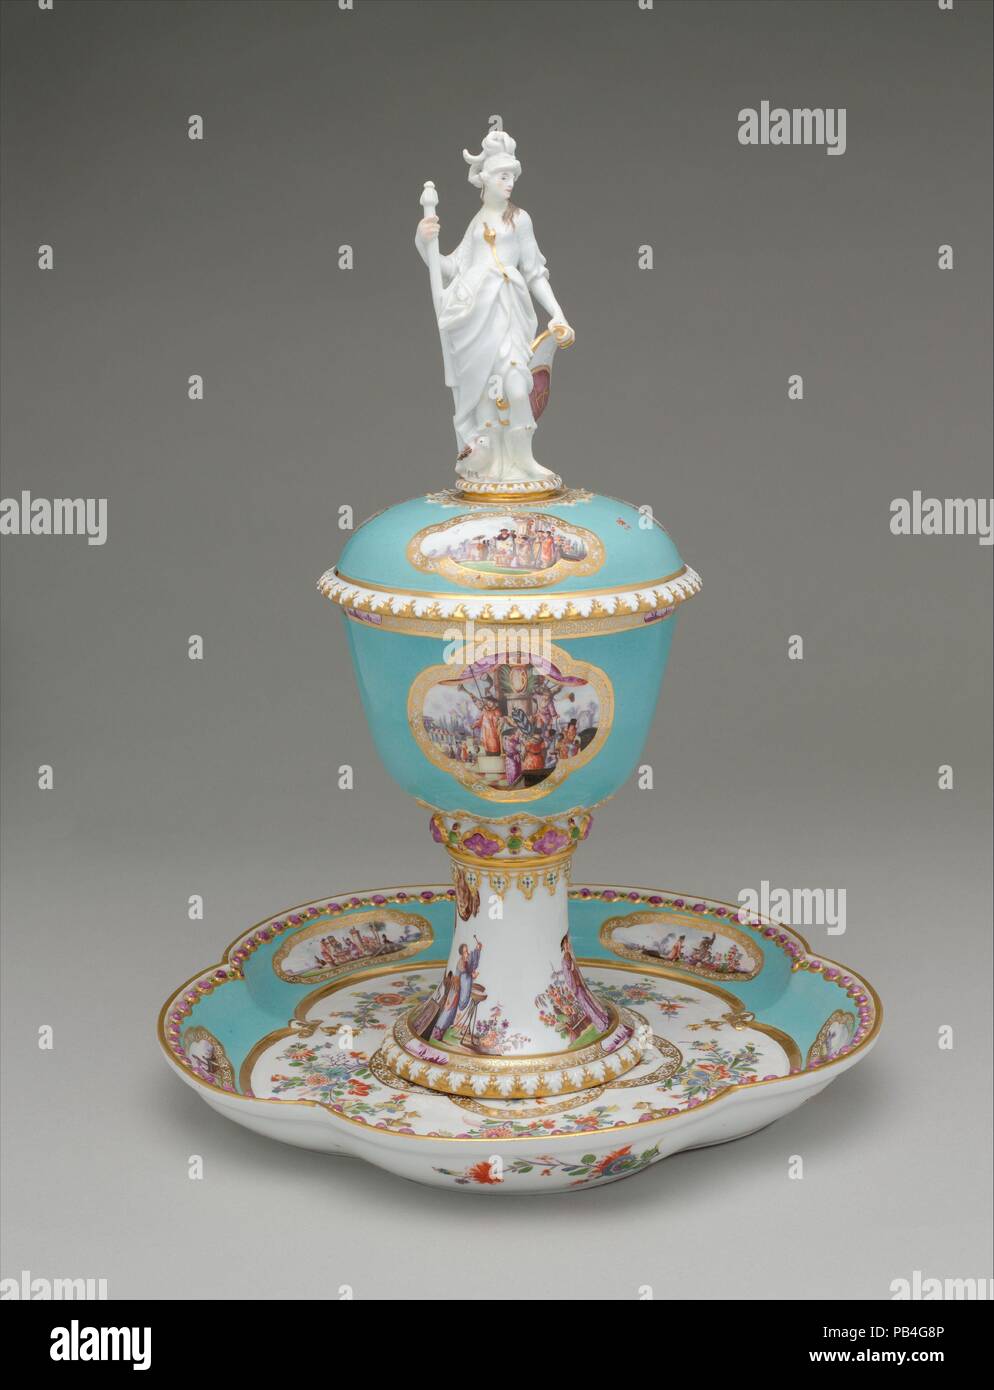 Standing cup with cover and stand. Culture: German, Meissen. Dimensions: Overall, cup: 15 1/2 x 6 1/4 in. (39.4 x 15.9 cm); Overall, stand: 1 1/2 x 11 1/2 in. (3.8 x 29.2 cm). Factory: Meissen Manufactory (German, 1710-present). Modeler: Johann Joachim Kändler (German, Fischbach 1706-1775 Meissen). Date: ca. 1735.  Commissioned by Augustus the Strong, Elector of Saxony and King of Poland, to commemorate the state visit to Dresden in January 1728 of the king and queen of Prussia, parents of Frederick the Great. The queen's initials, SD for Sophie-Dorothea, are three times displayed. The larger  Stock Photo